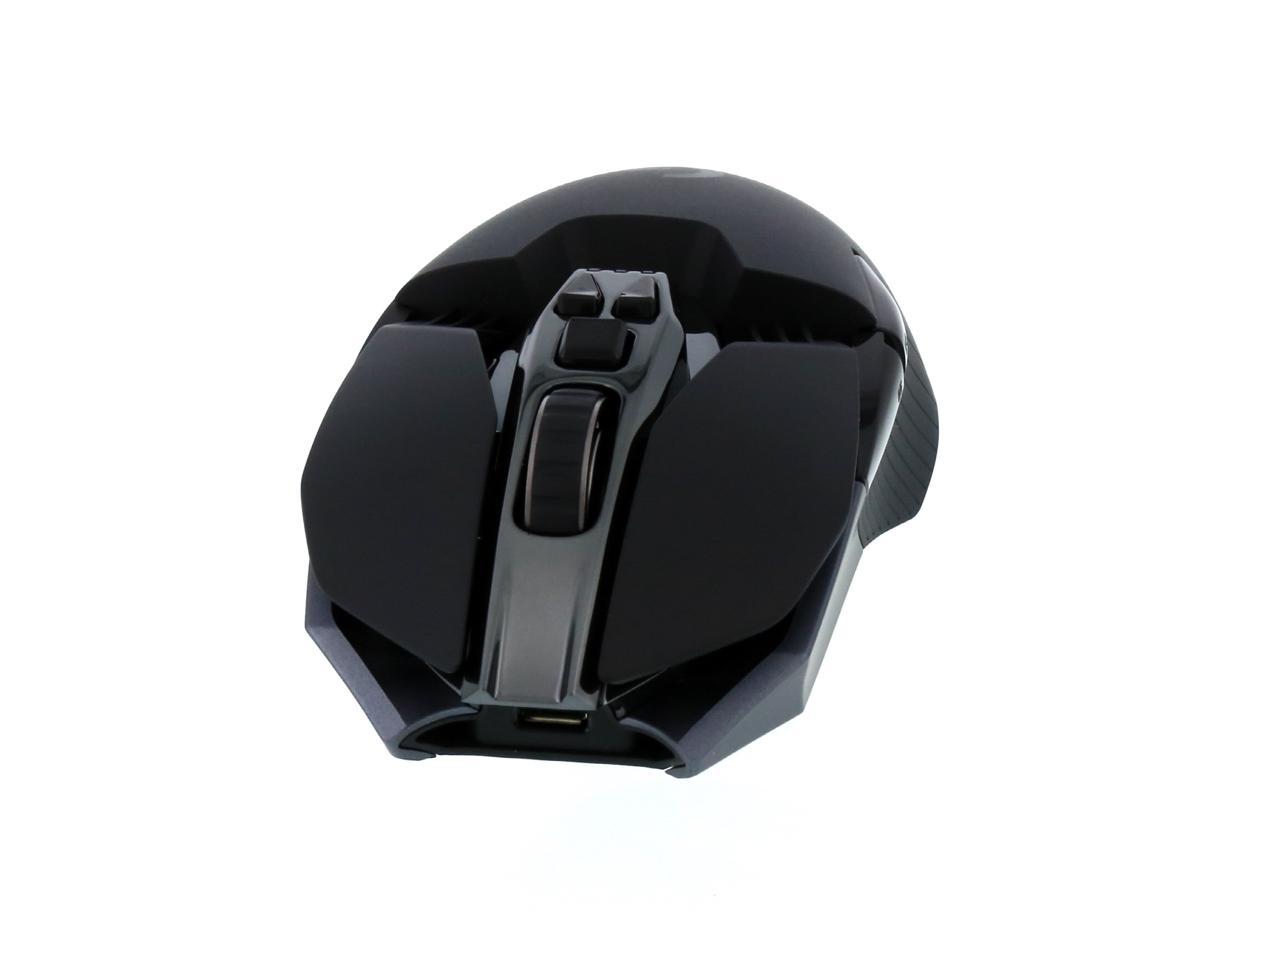 Logitech G900 Chaos Spectrum Professional Grade Wired/Wireless Gaming Mouse Newegg.com